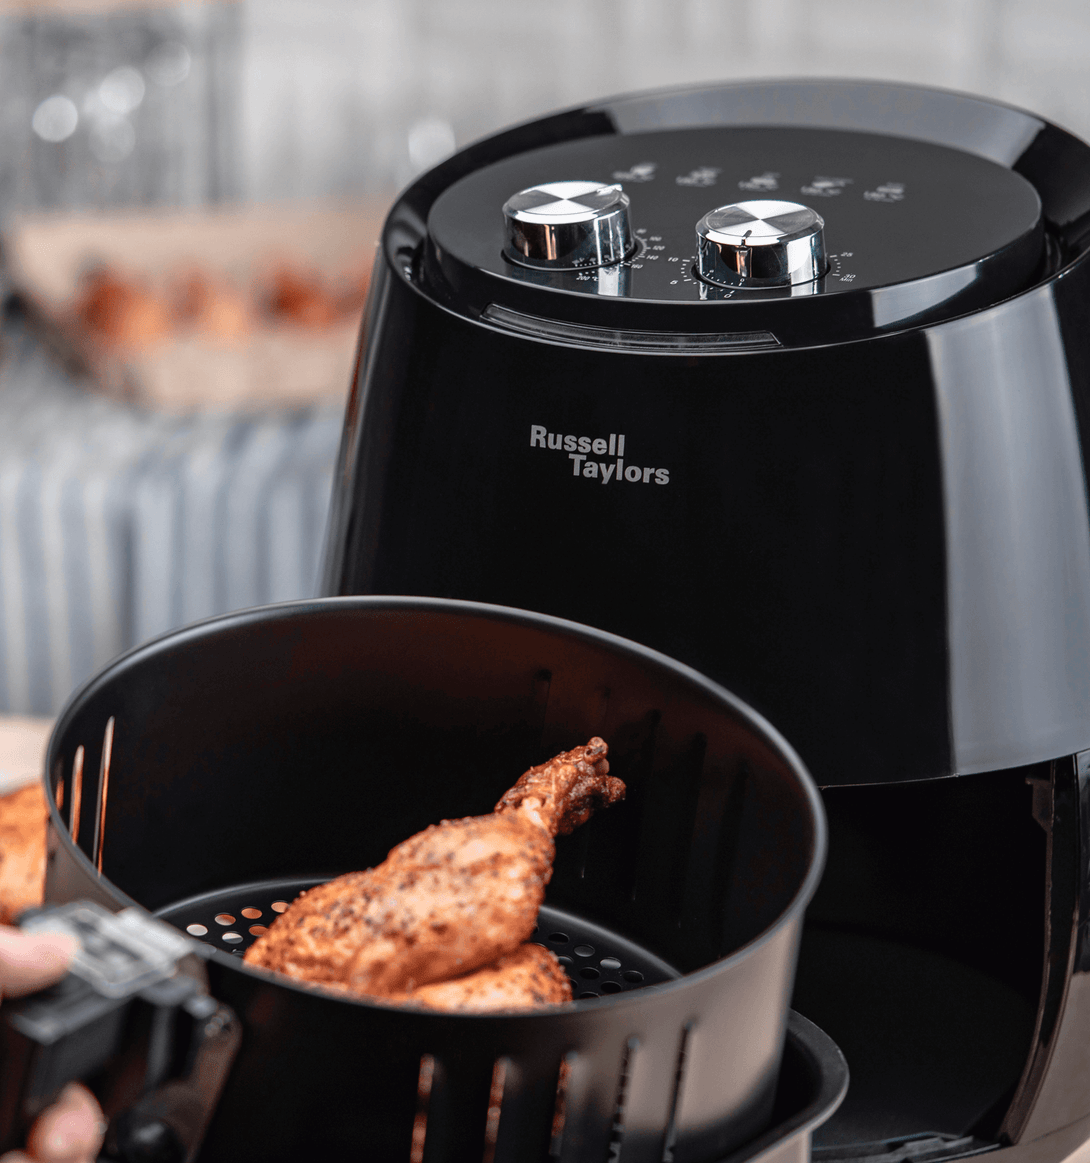 Russell Taylors Air Fryer 4.8L AF-34